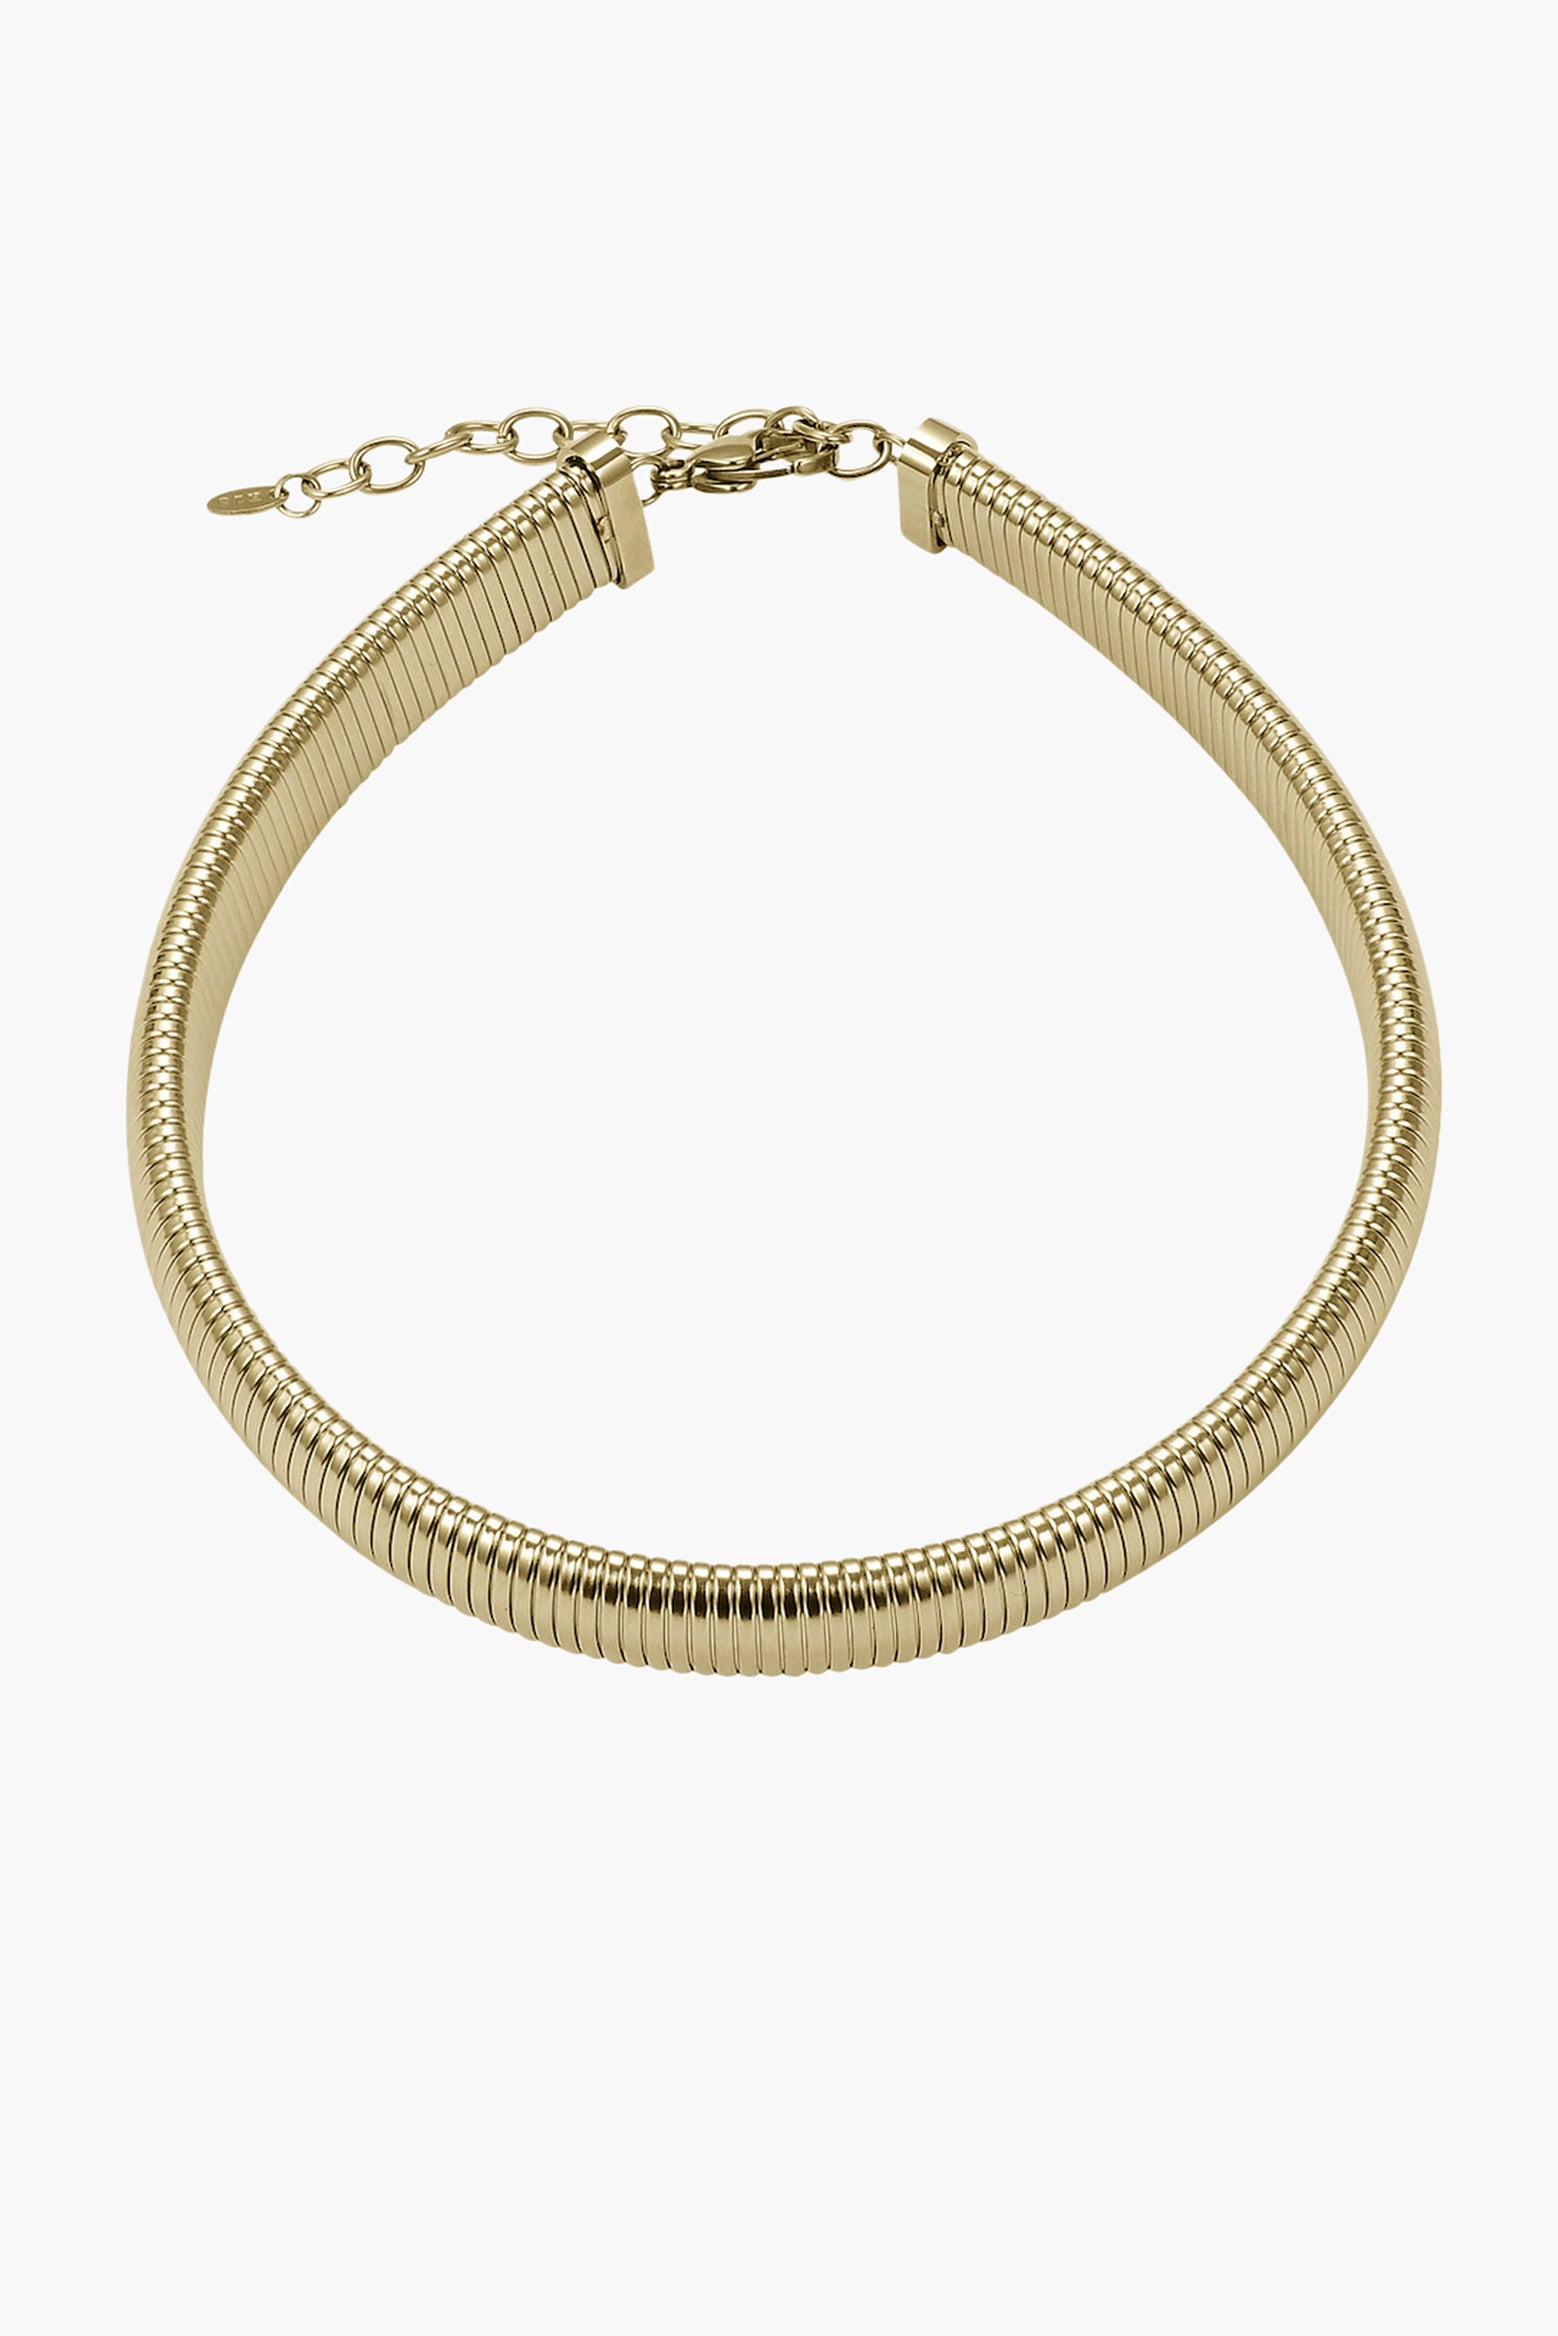 Anna Rossi The Slinky Chain Necklace in Gold available at TNT The New Trend Australia